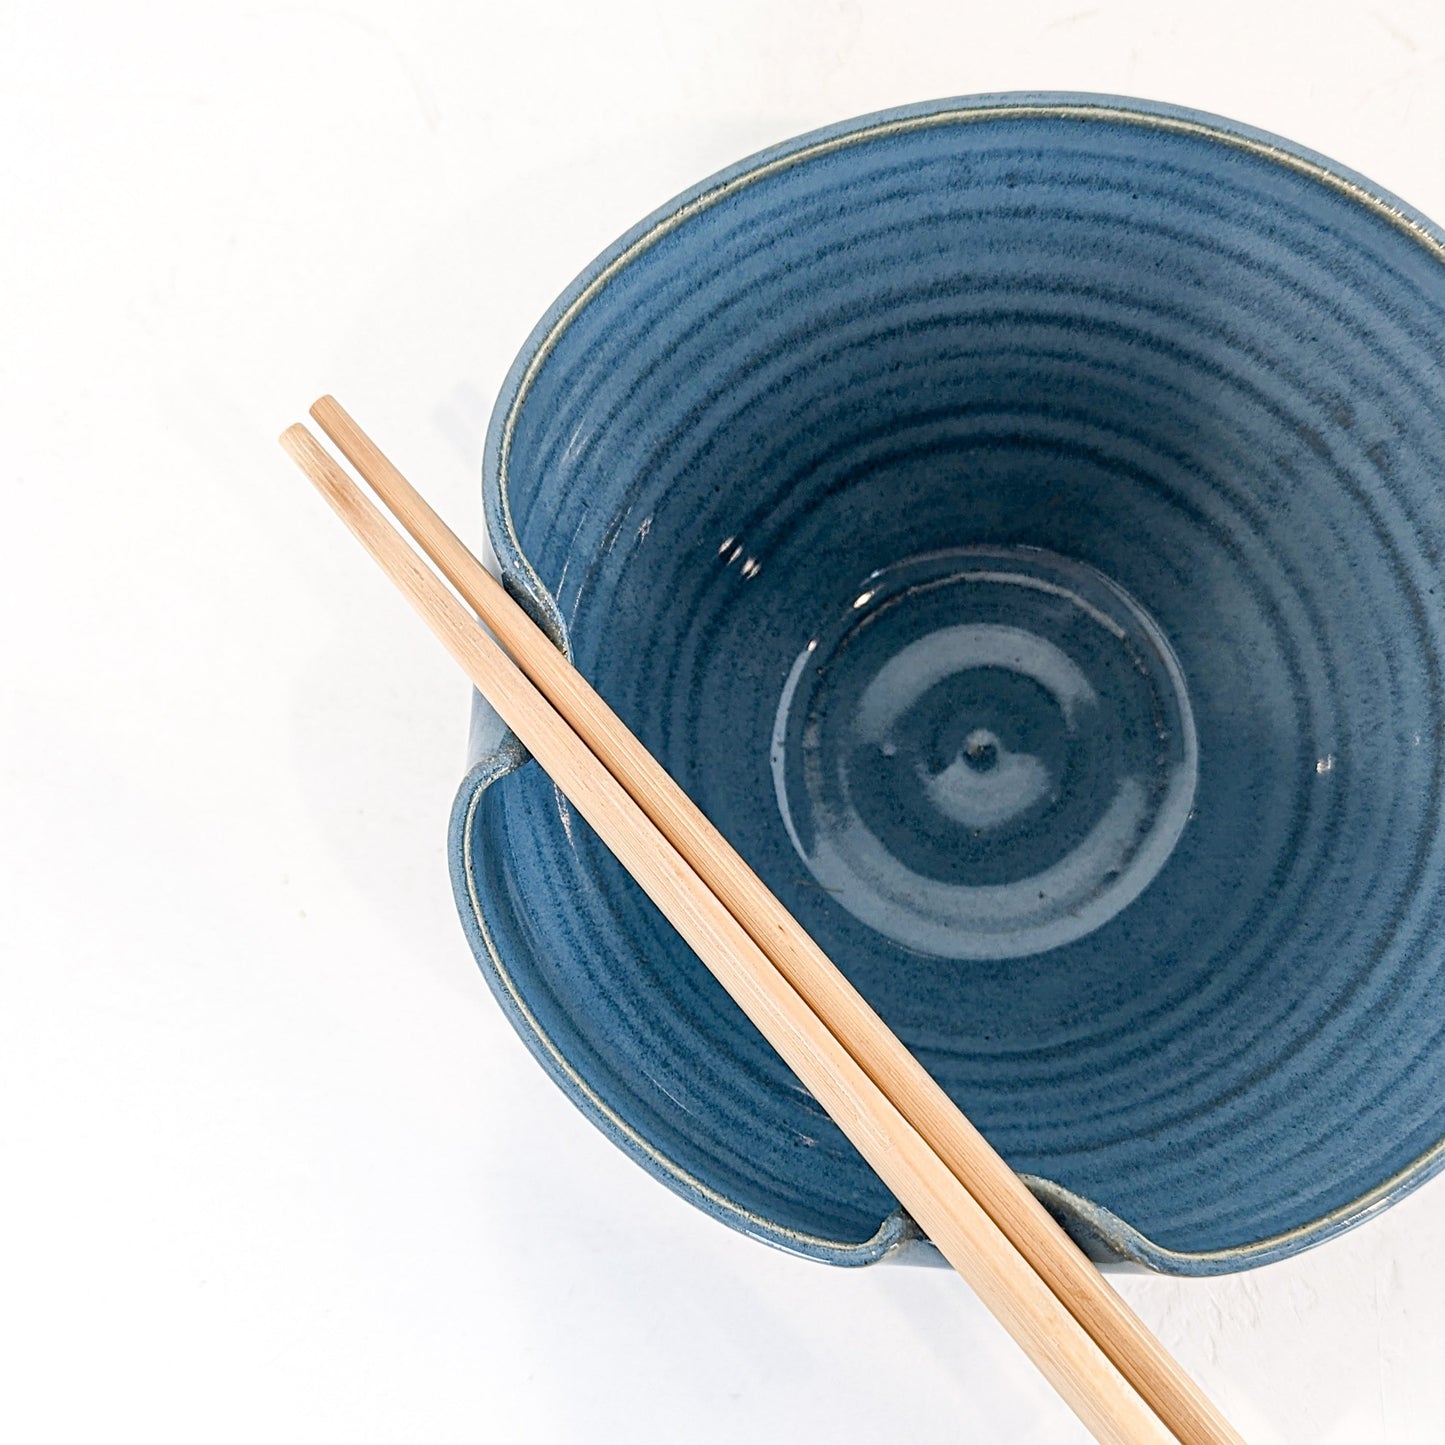 Handmade ceramic bowl featuring a folded lip for a convenient utensil holder. These Handmade bowls are made by Black Oak Art in Waco, Texas.